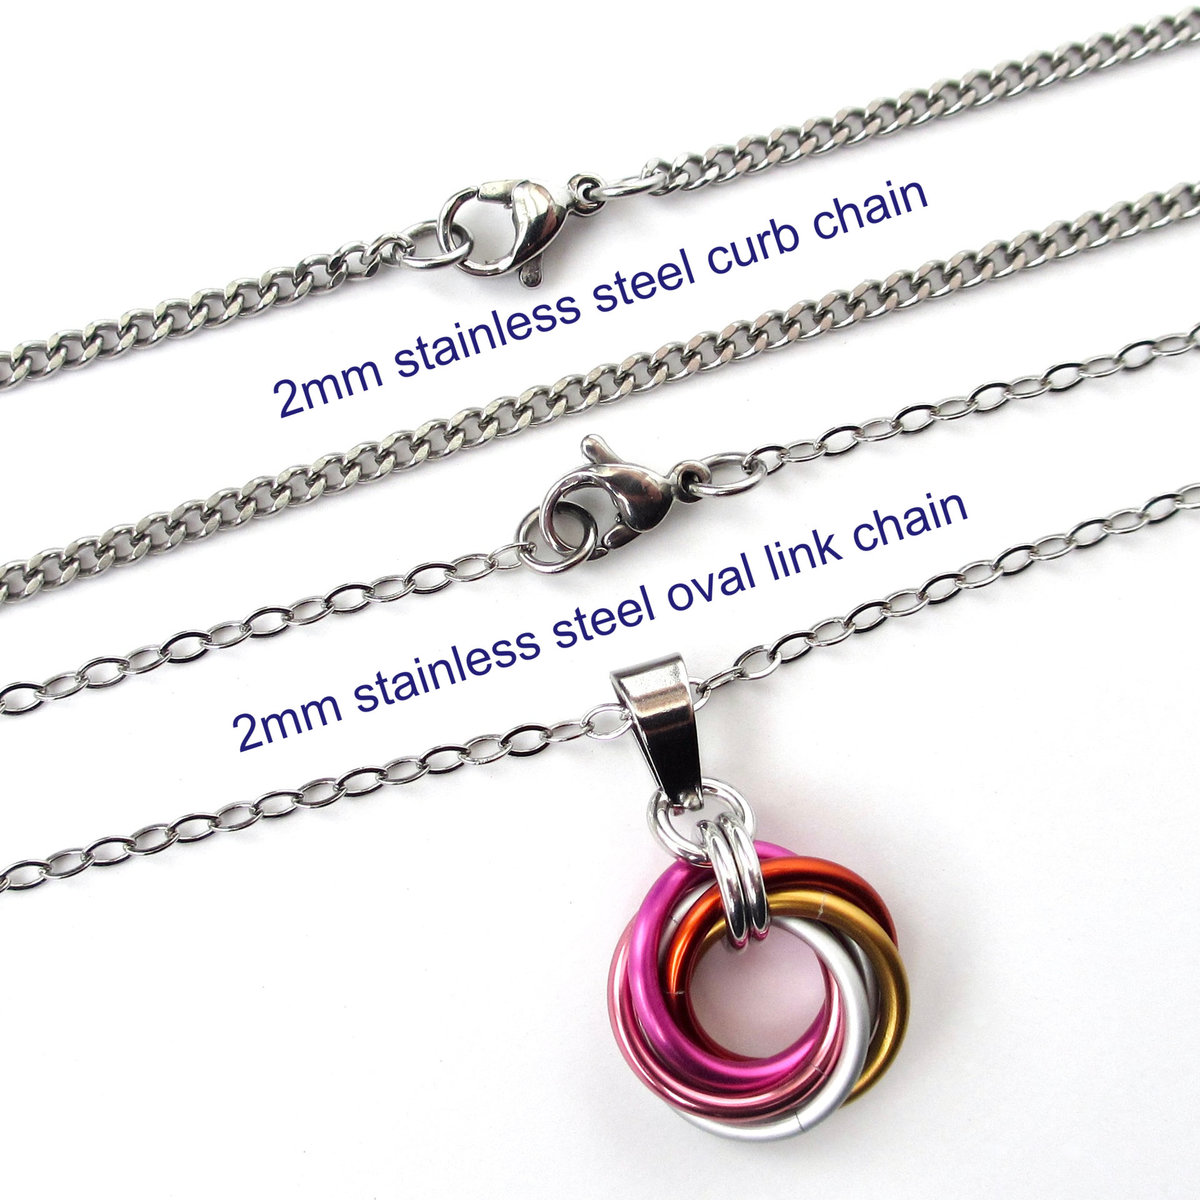 Lesbian pride pendant necklace, chainmail love knot, 5 color sunset flag, small LGBTQ jewelry